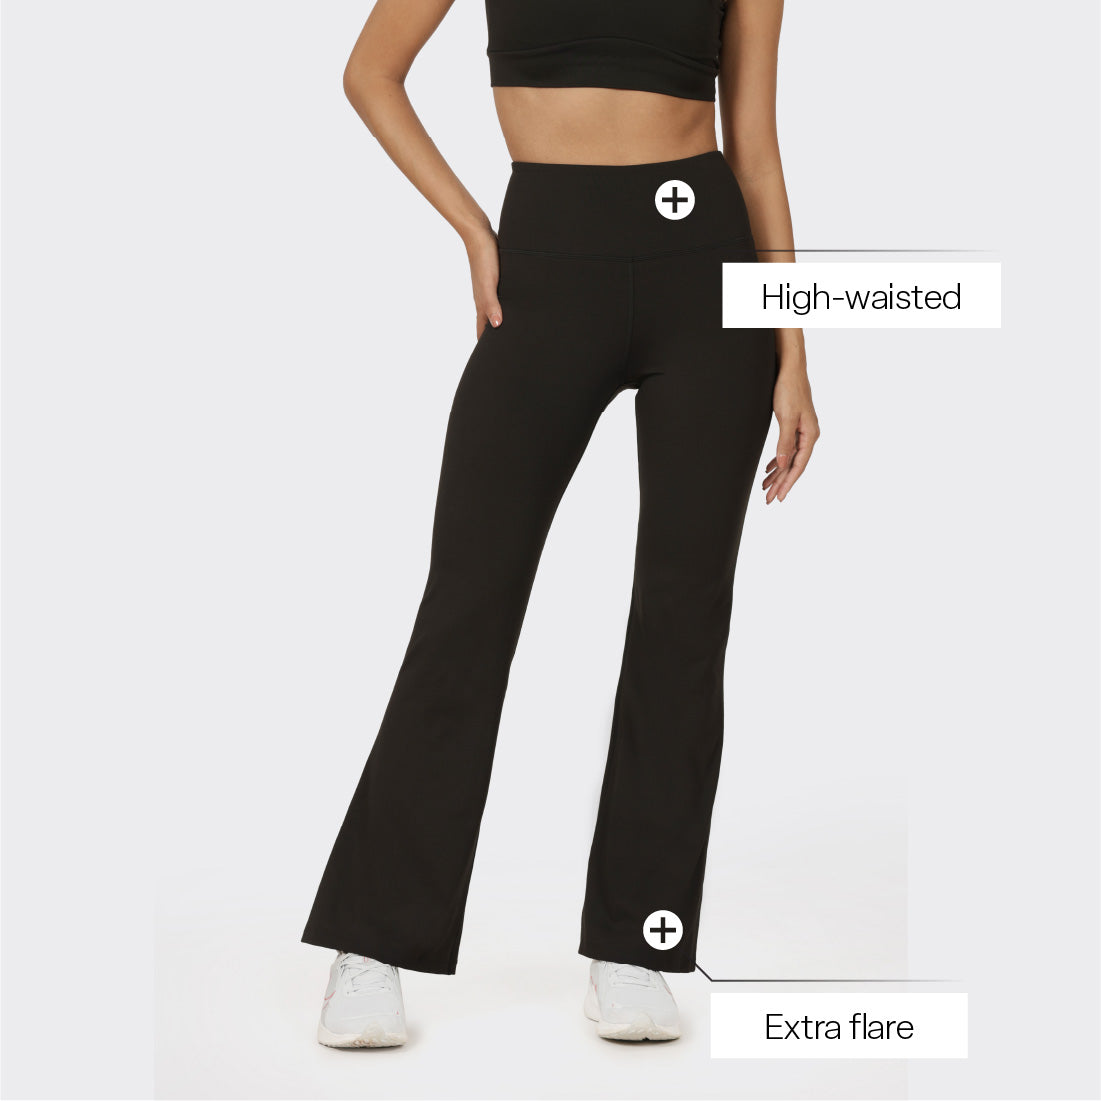 Say hello to Slit Flare Pants by #blissclub 😎 Link to sop in the